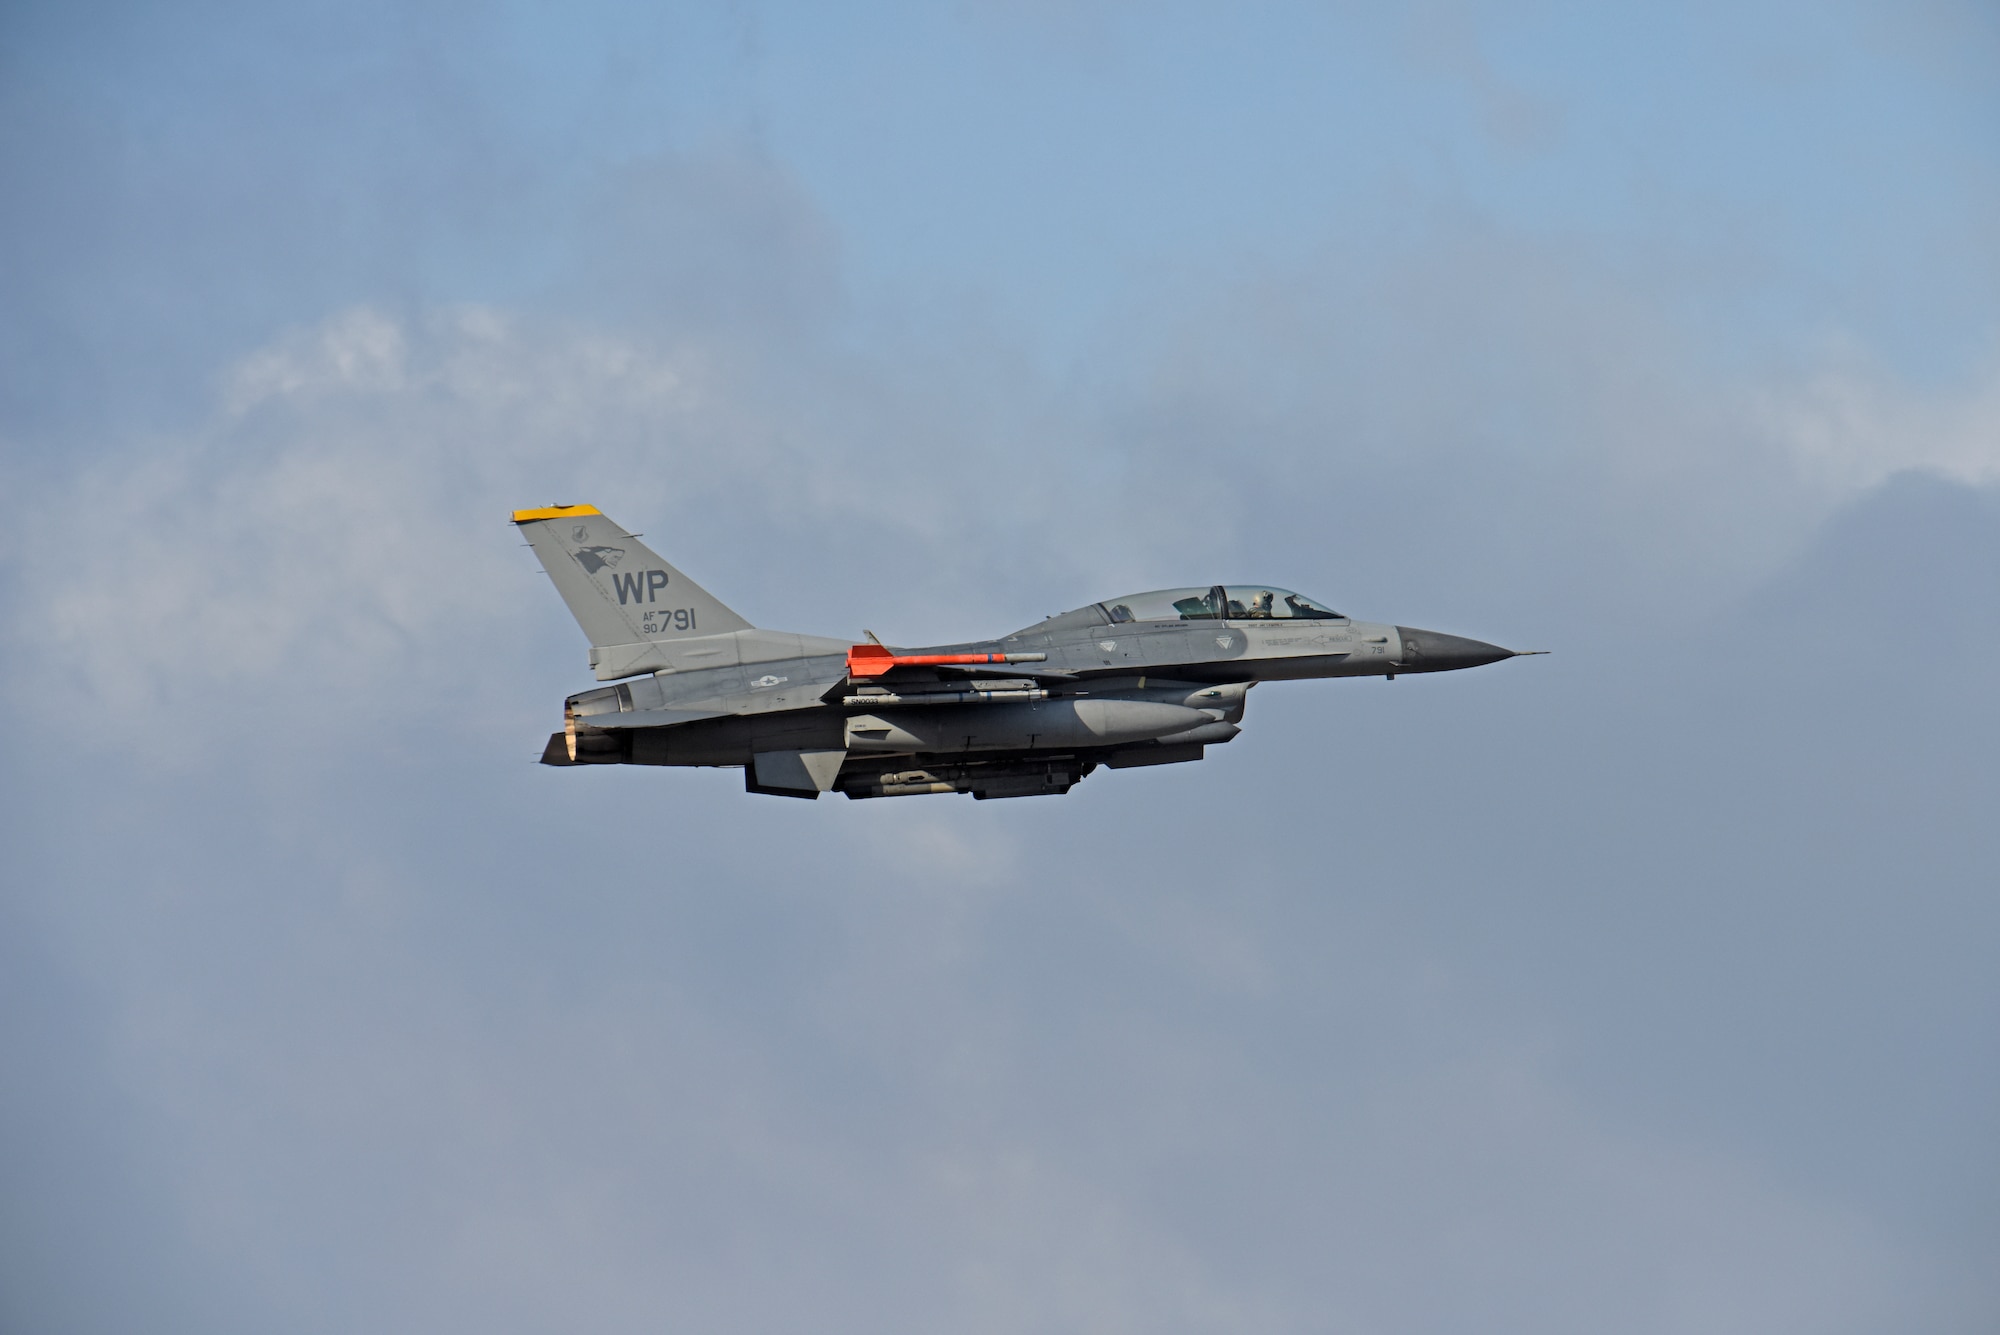 A U.S. Air Force F-16 Fighting Falcon assigned to the 80th Fighter Squadron takes off for routine flying at Kunsan Air Base, Republic of Korea, Nov. 19, 2019. The 80th FS “Juvats” perform air and space control roles including counter air, strategic attack, interdiction and close-air support missions. (U.S. Air Force photo by Staff Sgt. Mackenzie Mendez)